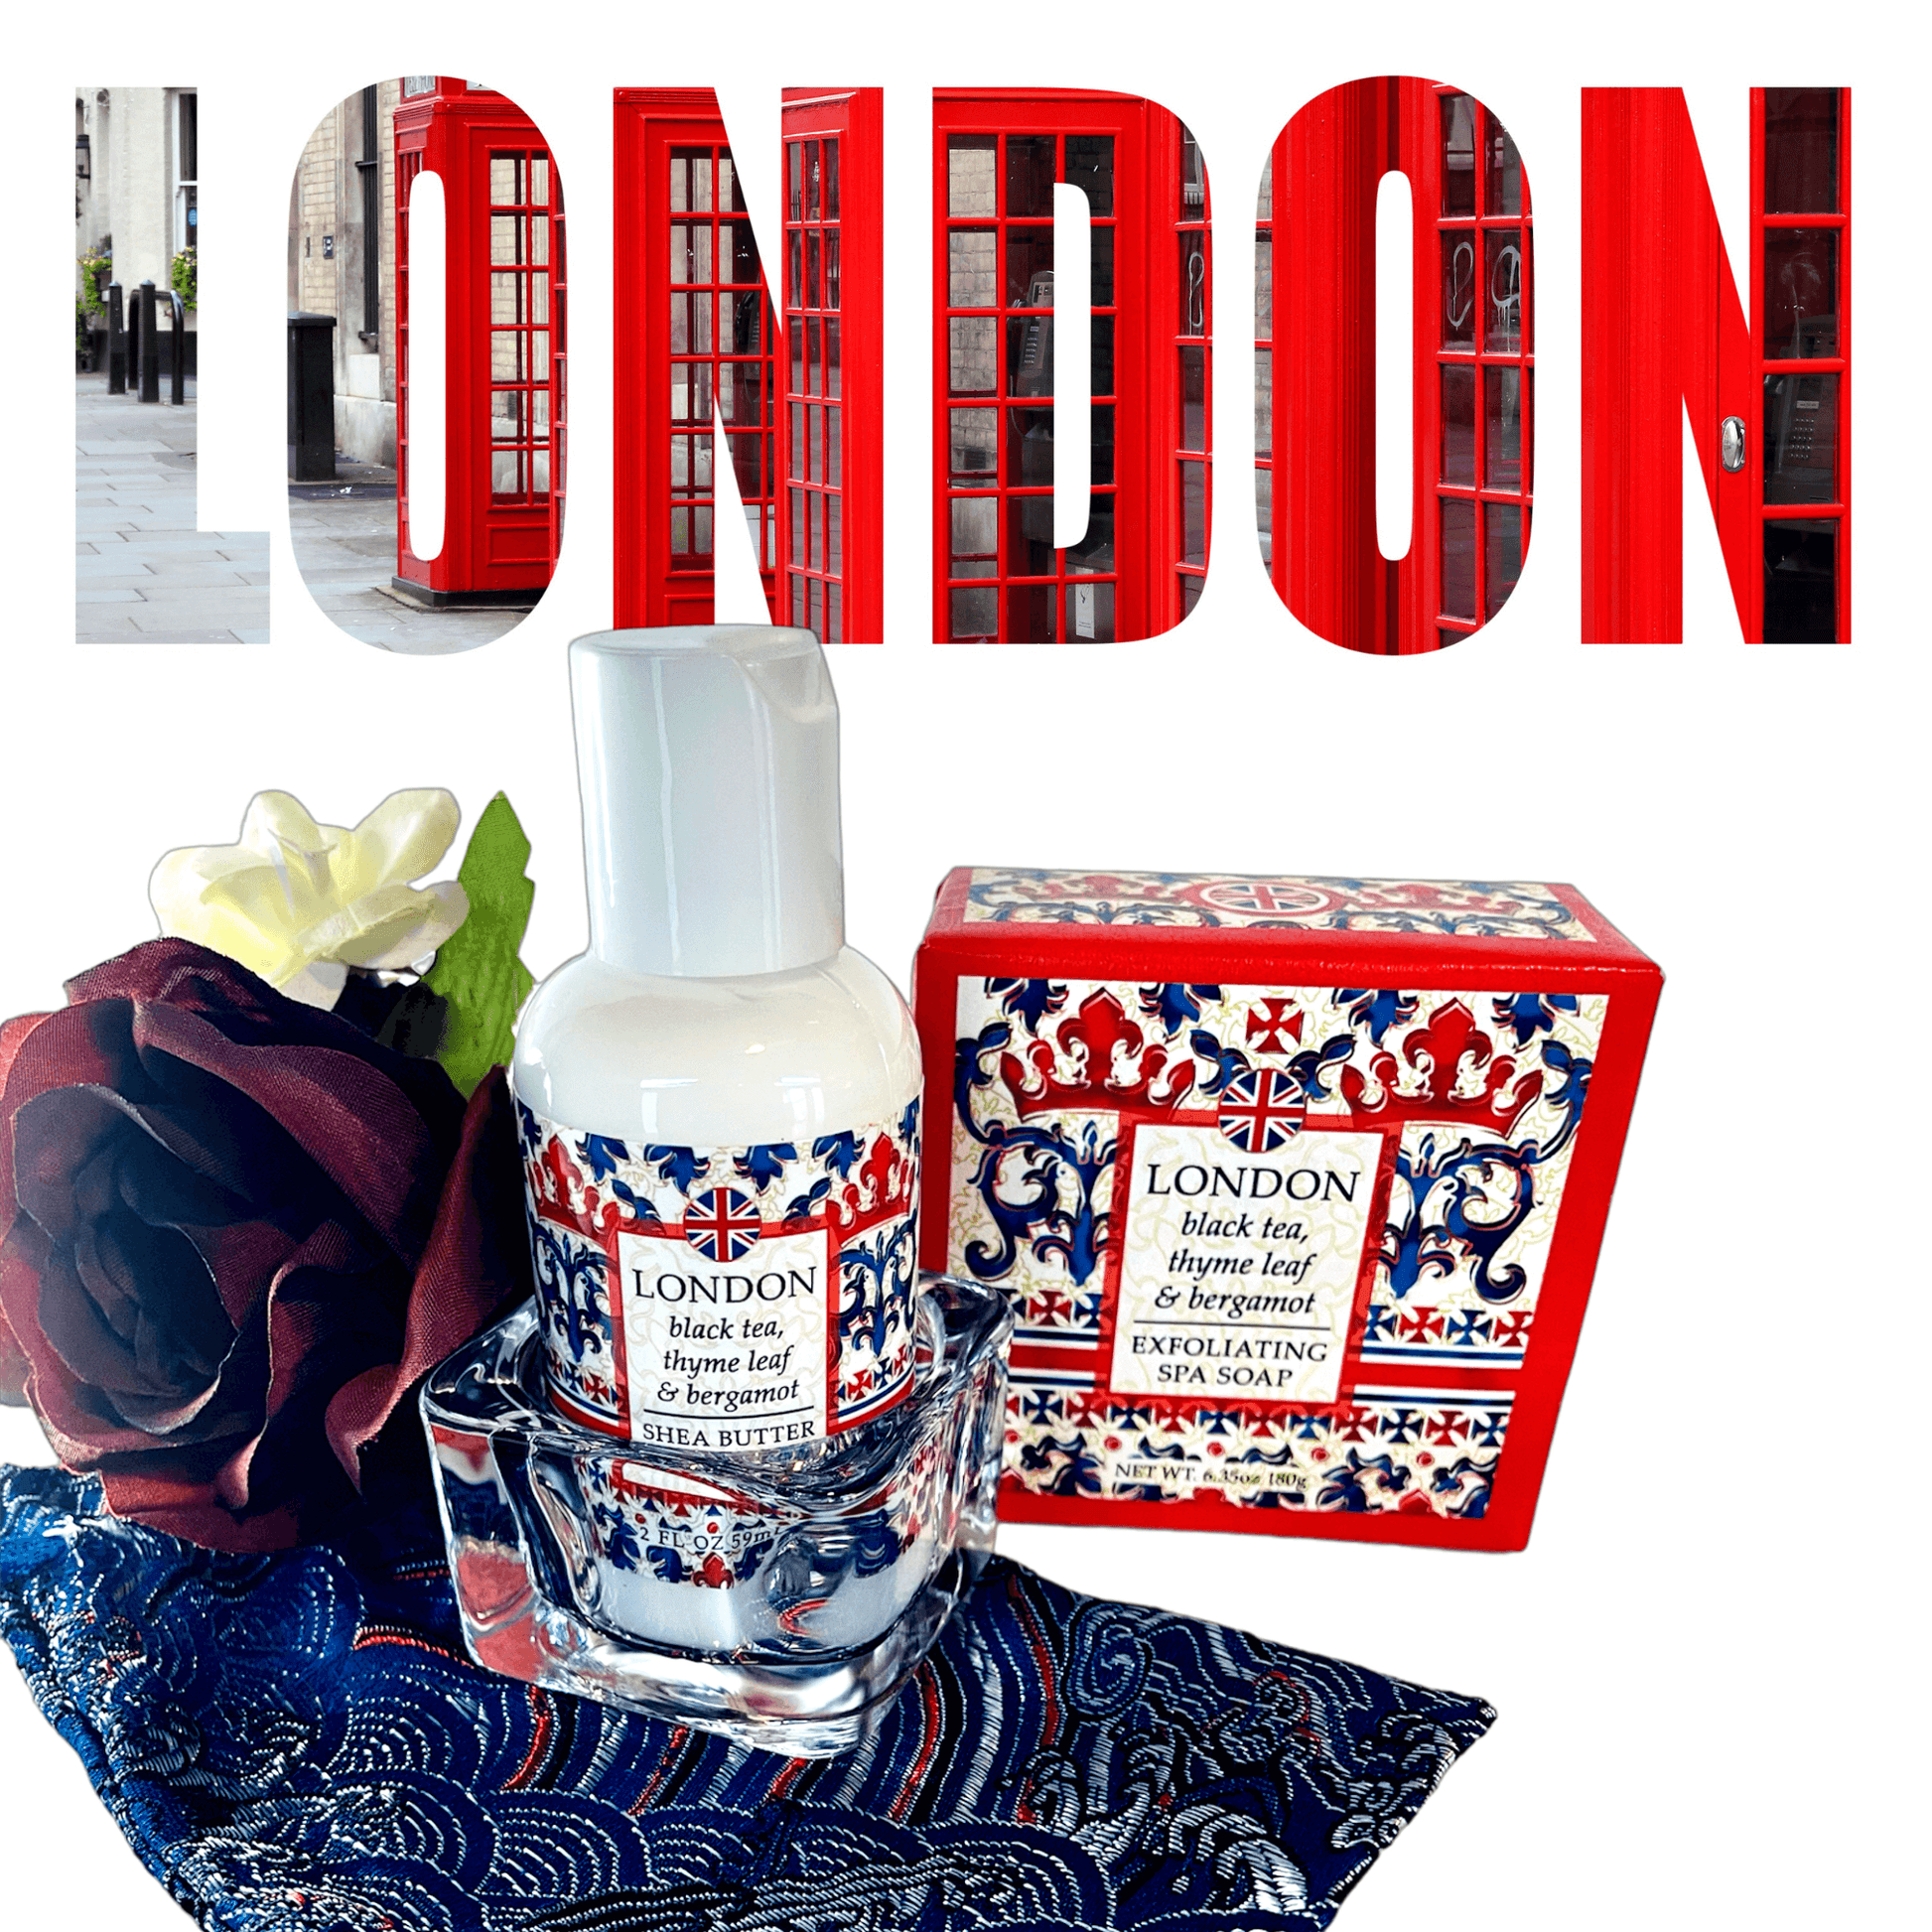 https://essentialgifting.com/products/bath-body-london-destination-collection